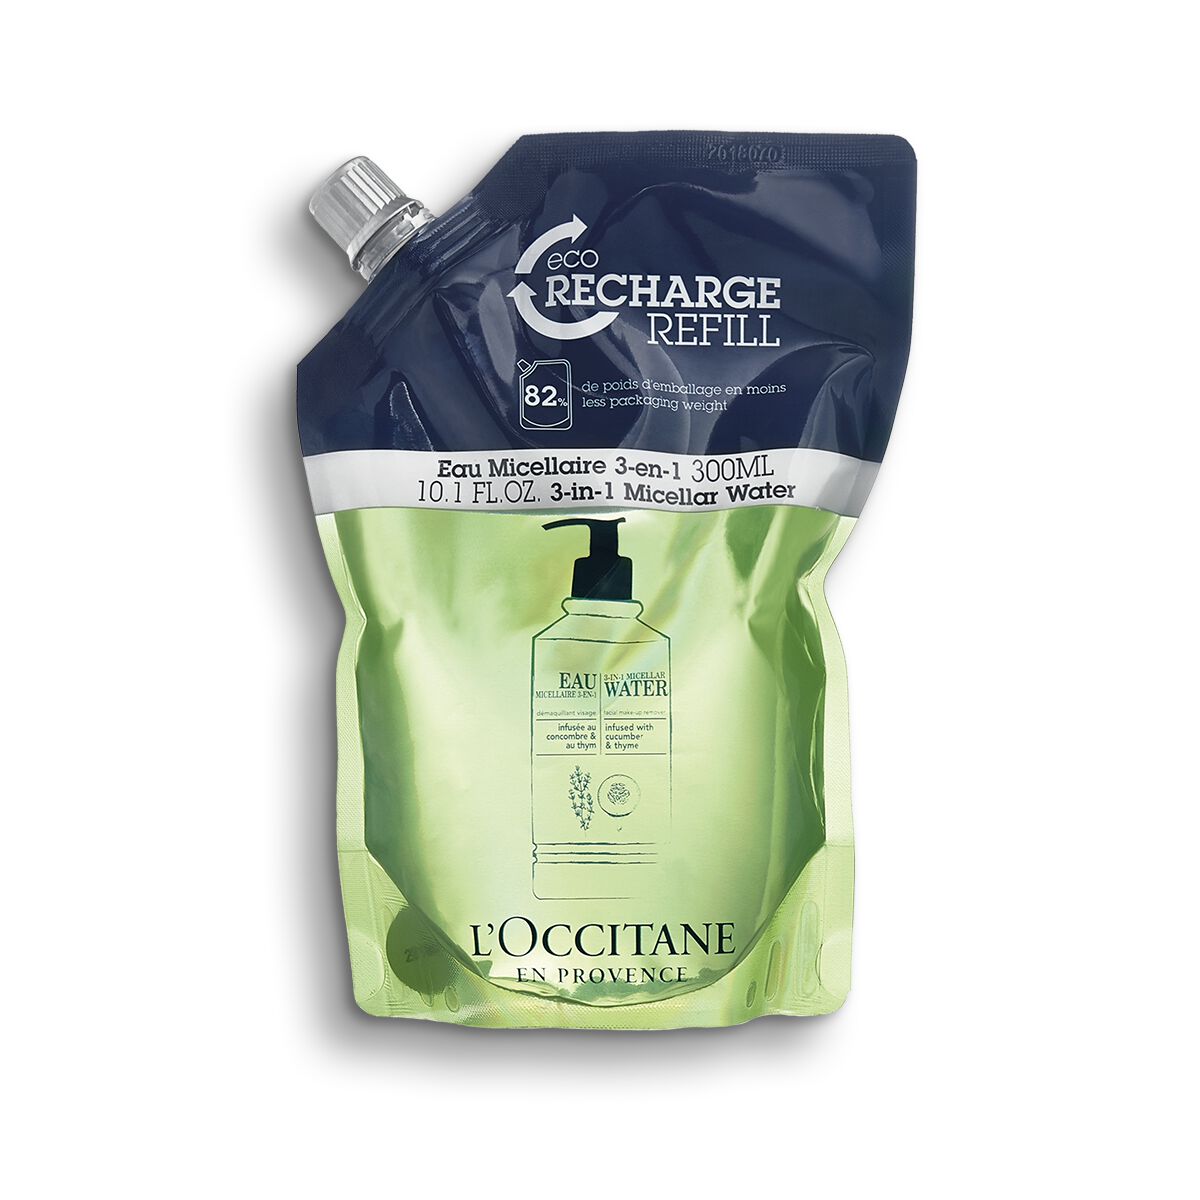 Eco-Refill Infusion Micellair Water 3-in-1 - 300 - L'Occitane en Provence